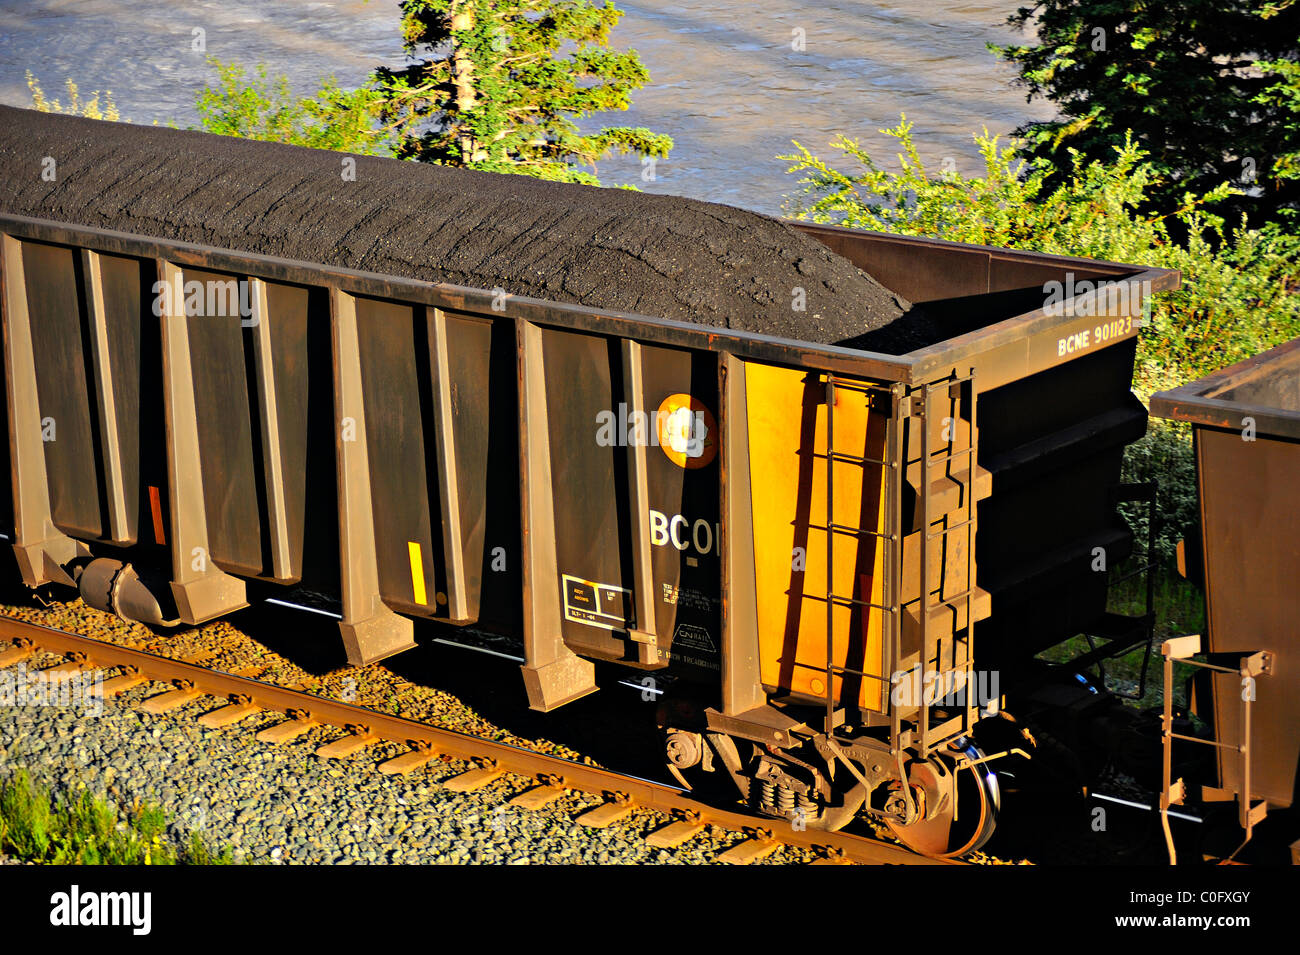 A close up image of a rail car loaded with coal ore Stock Photo